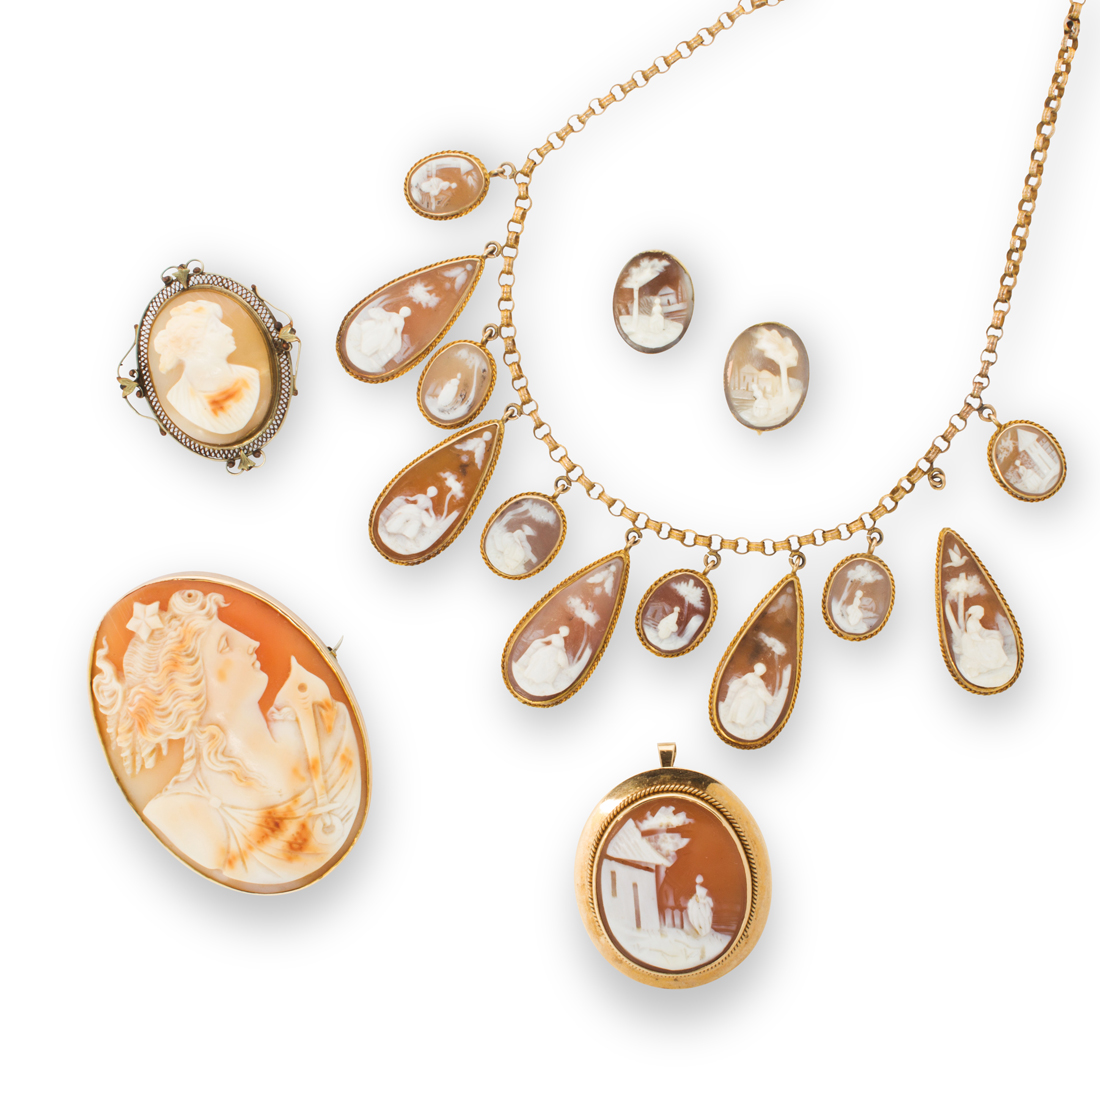 A GROUP OF CARVED SHELL CAMEO JEWELRY 3a2744